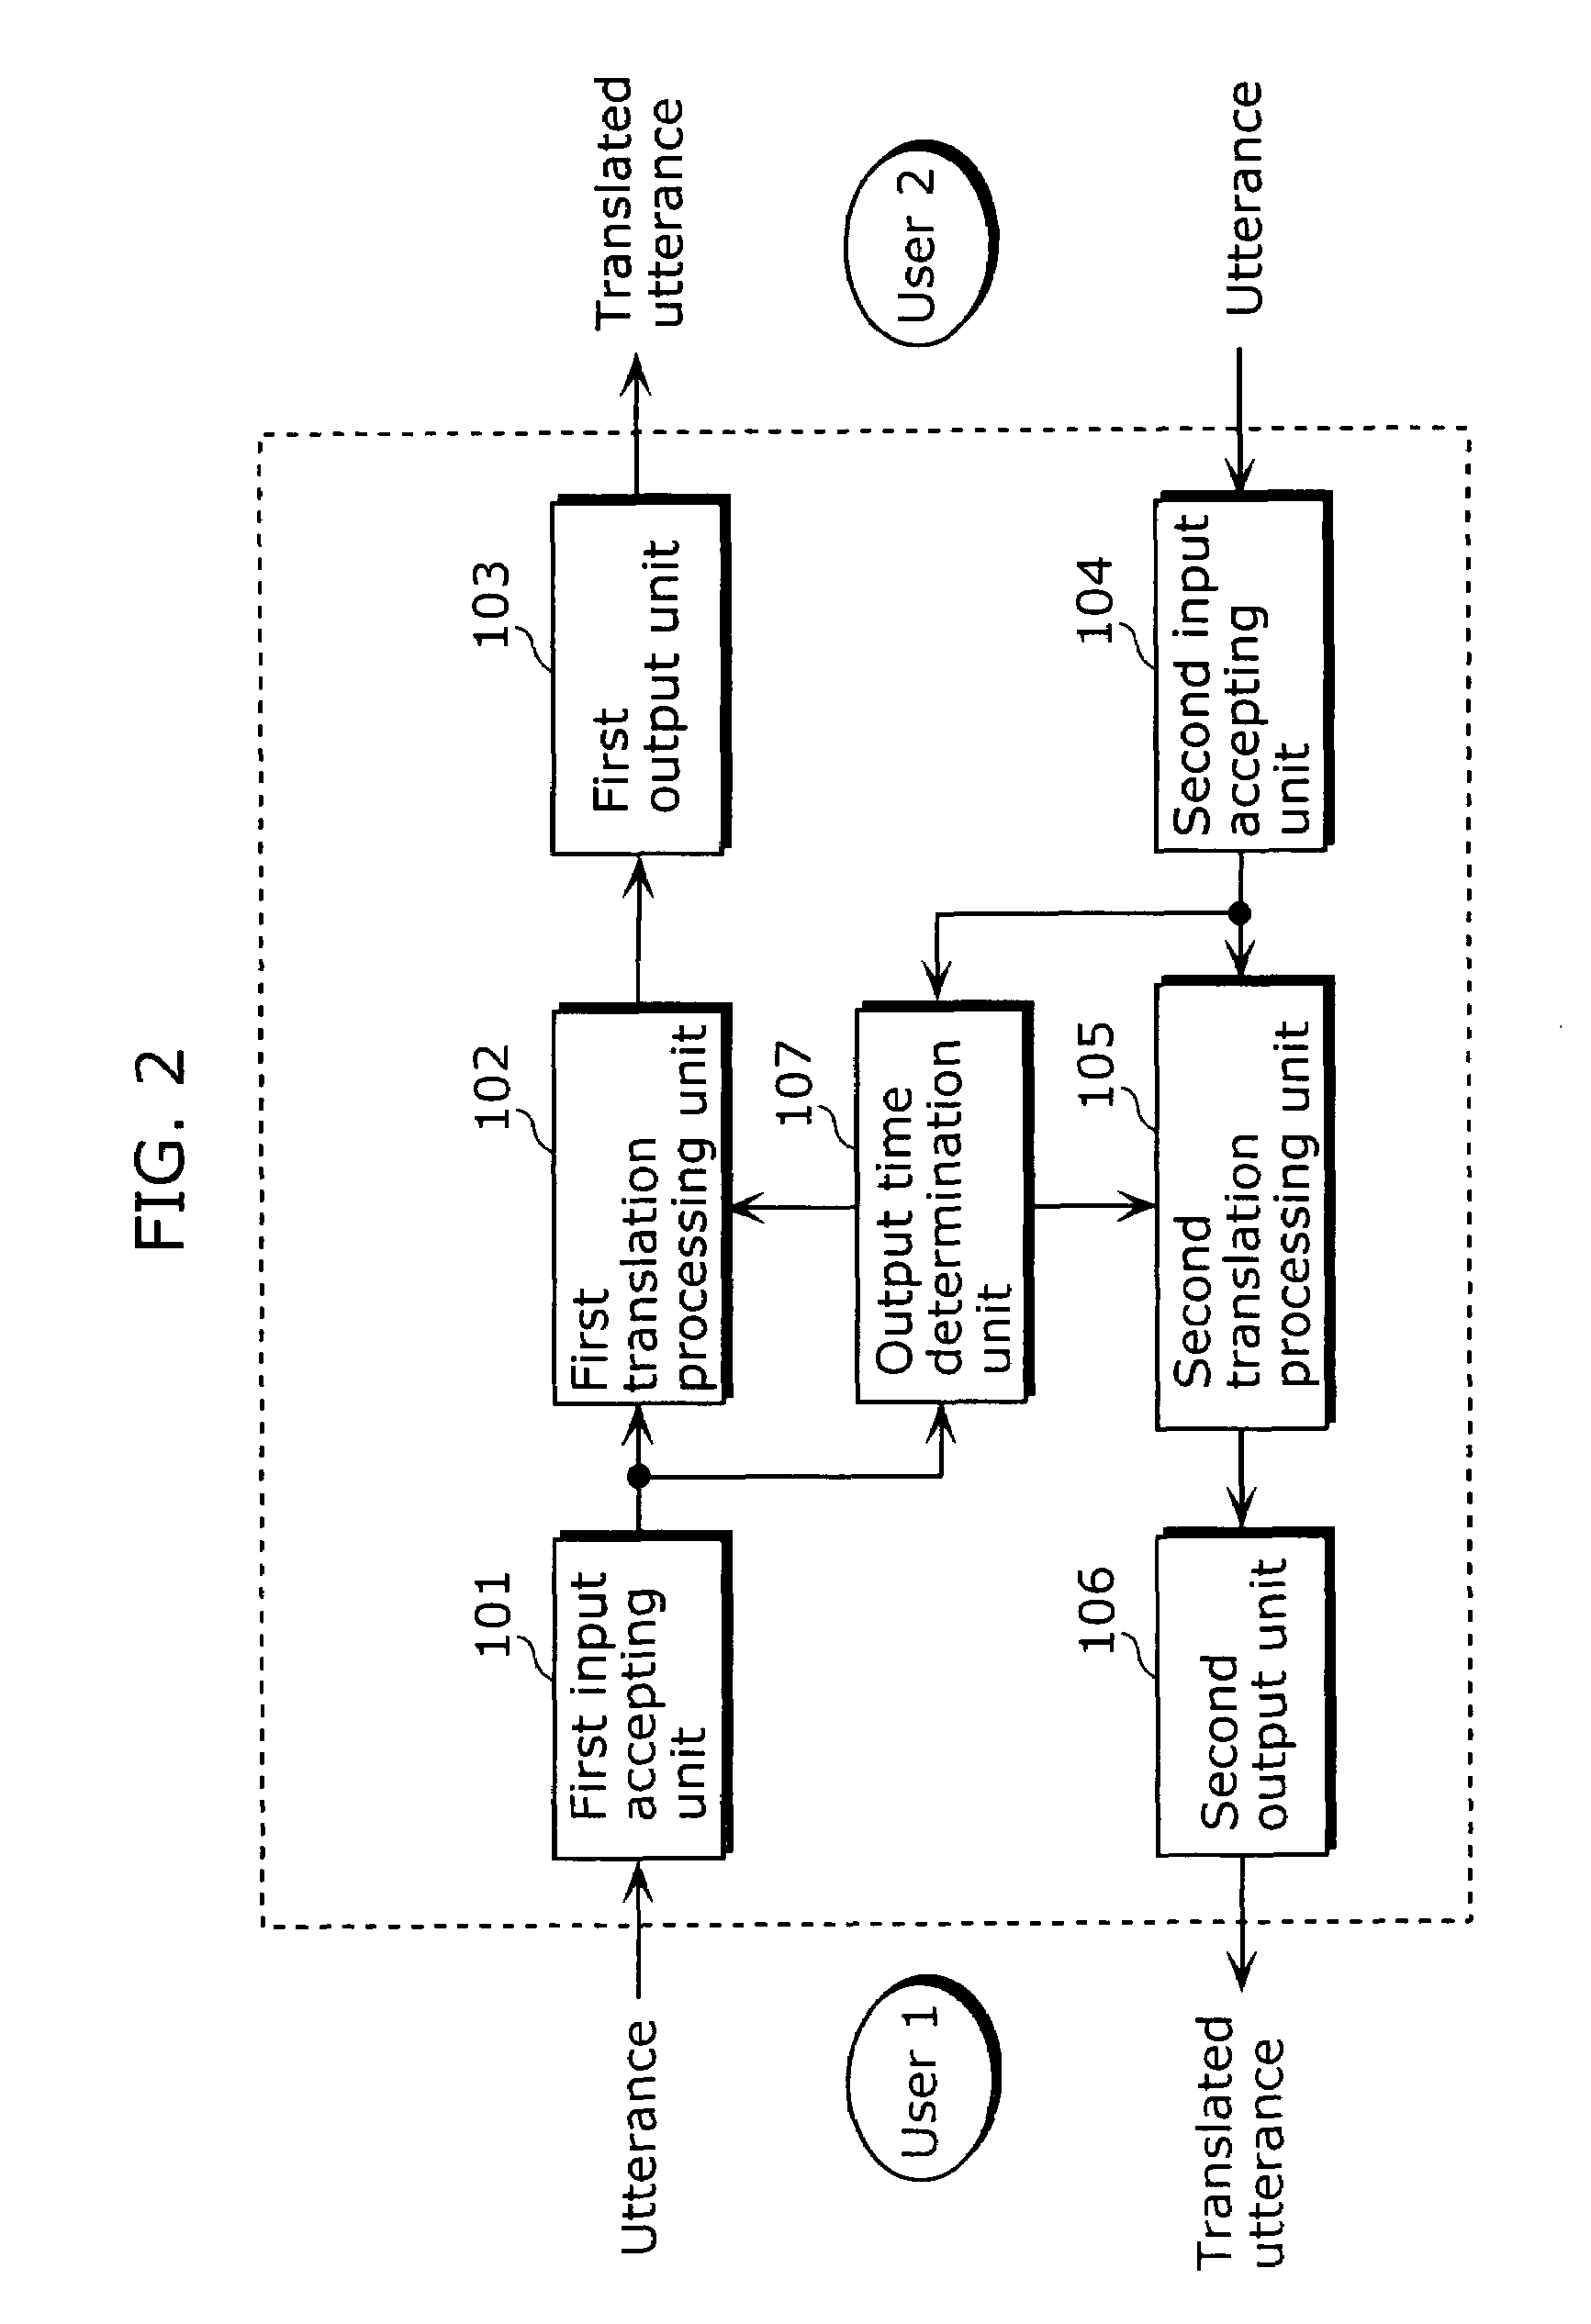 Dialogue supporting apparatus